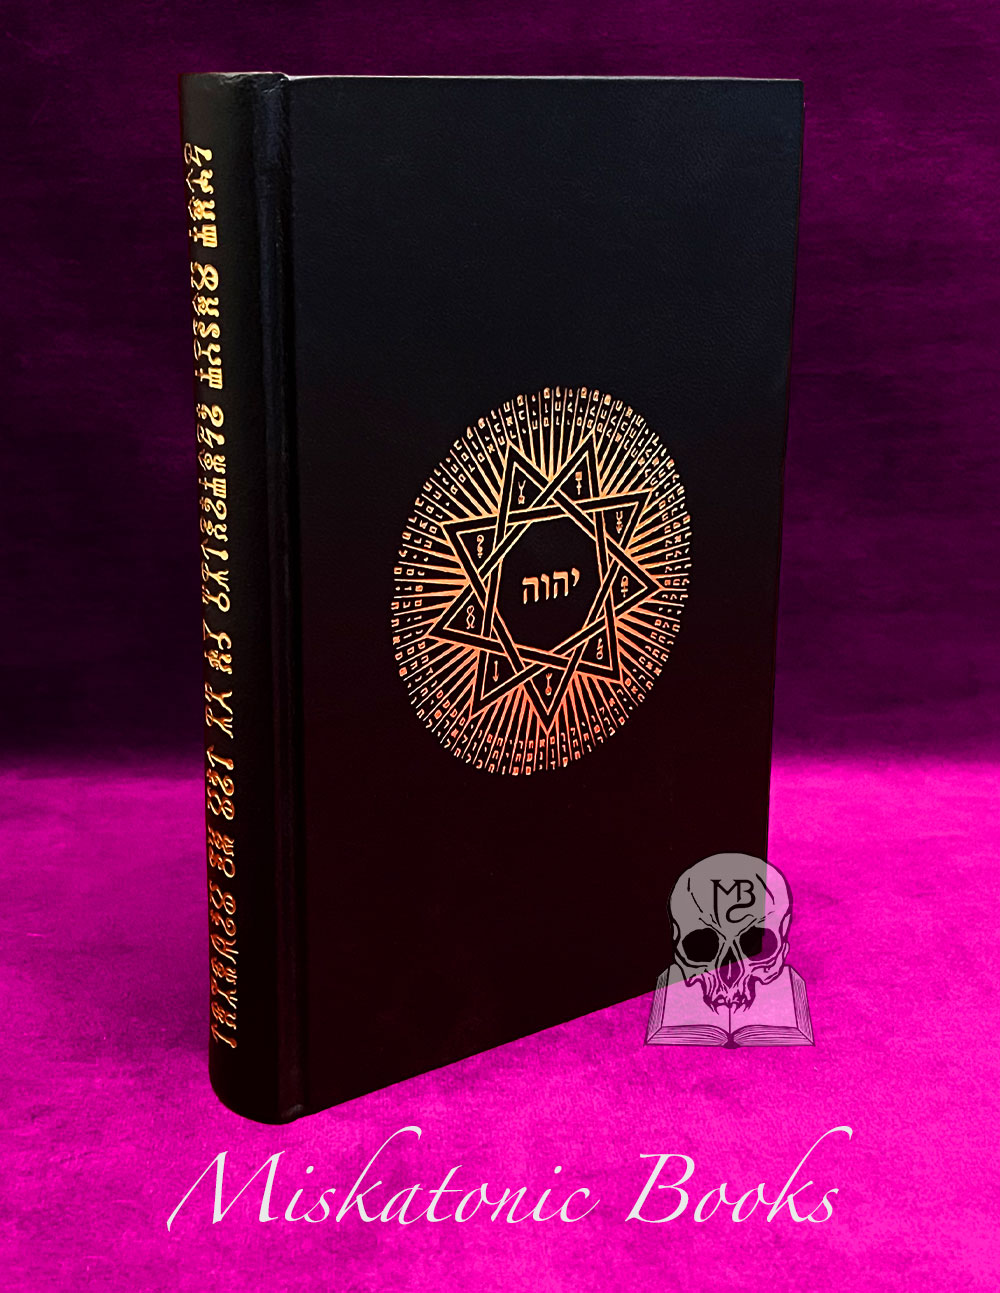 BLACK MAGIC EVOCATION OF THE SHEM HA MEPHORASH by G. de Laval (Bound In Full Goatskin Leather Deluxe Edition)